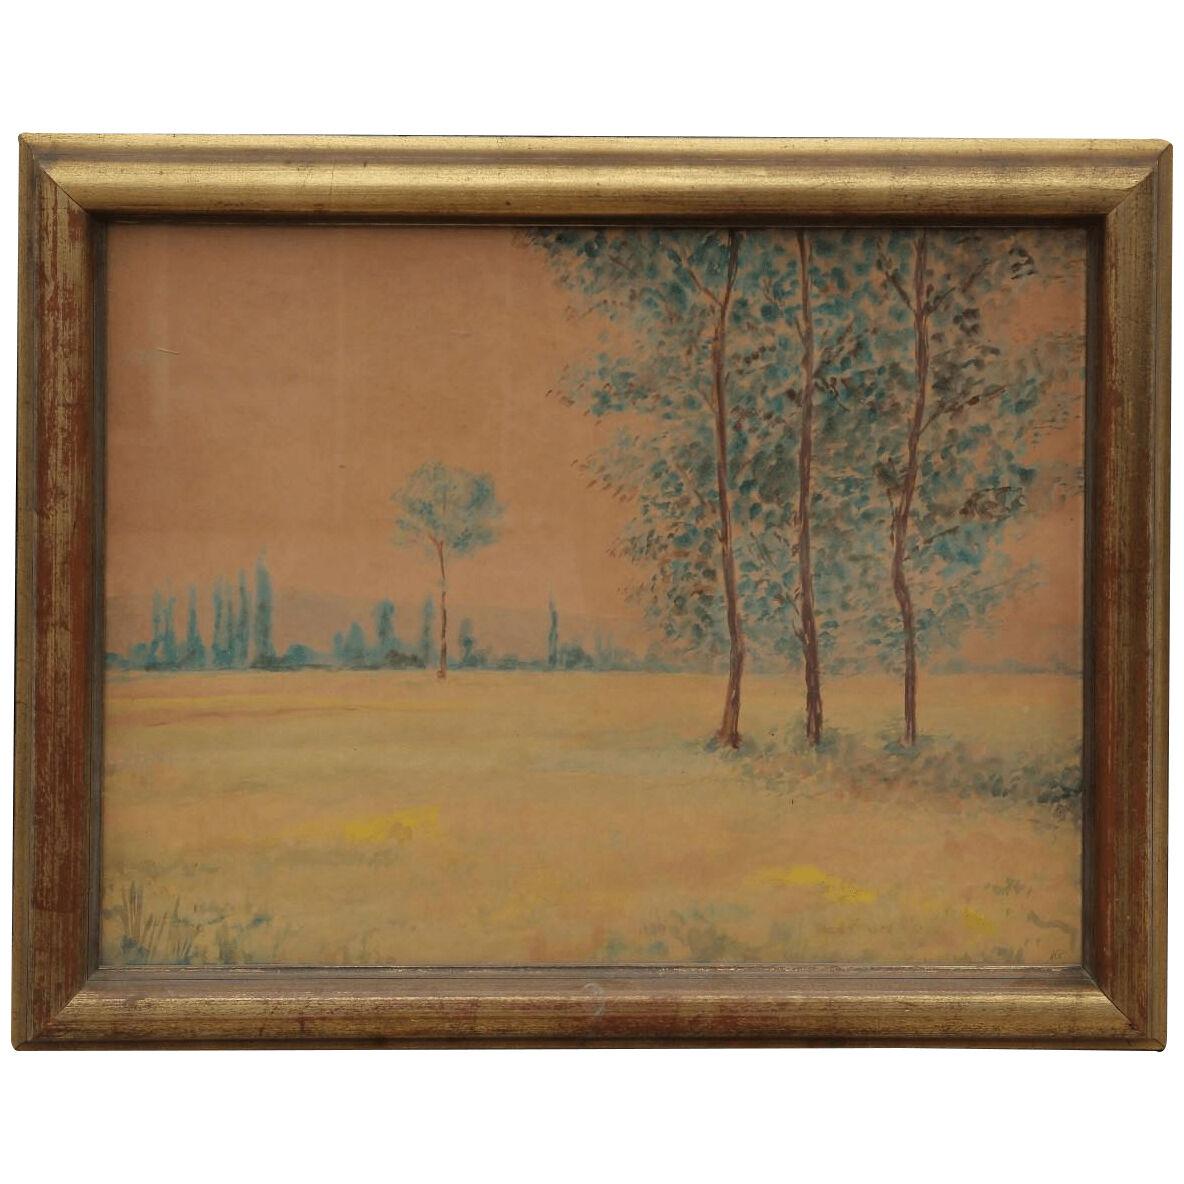 Unknown Early Modern Watercolor Impressionist Landscape with Trees Early 20th C